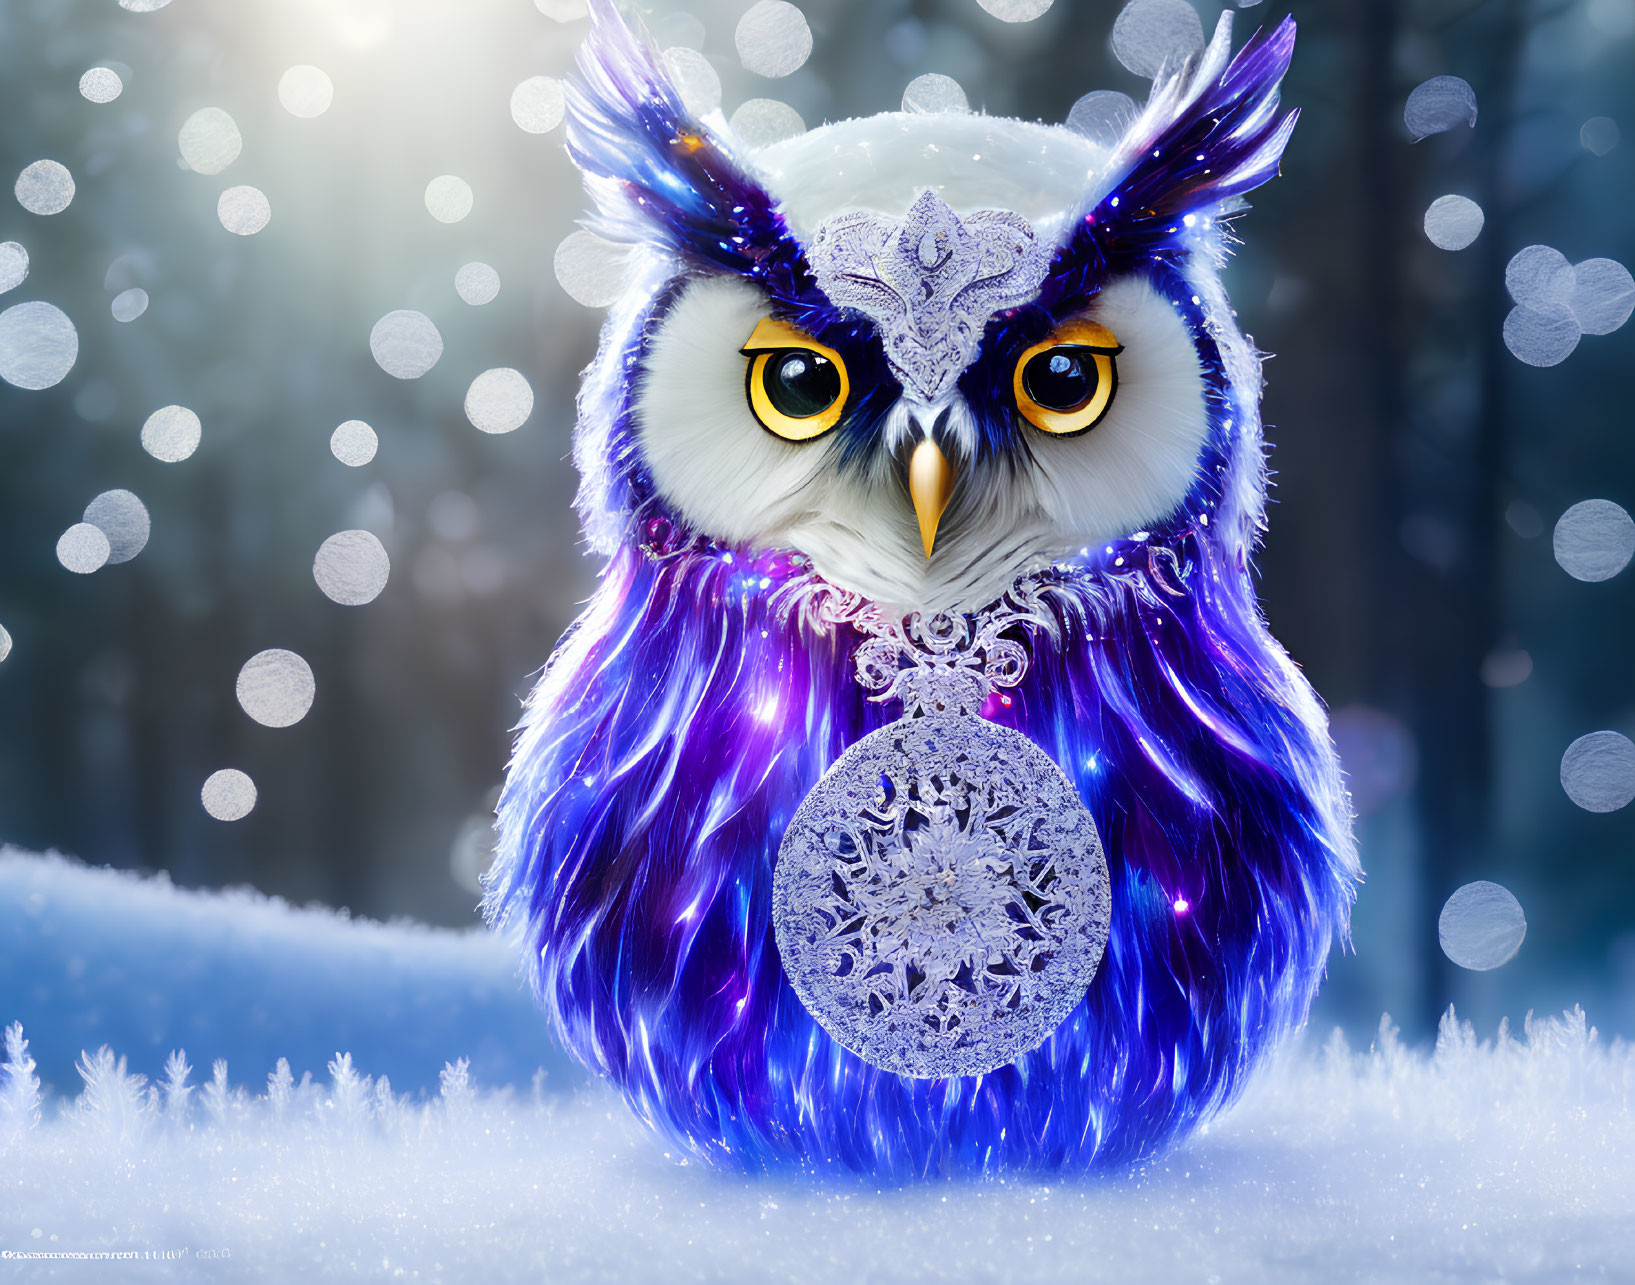 Colorful Stylized Owl Illustration in Snowy Scene